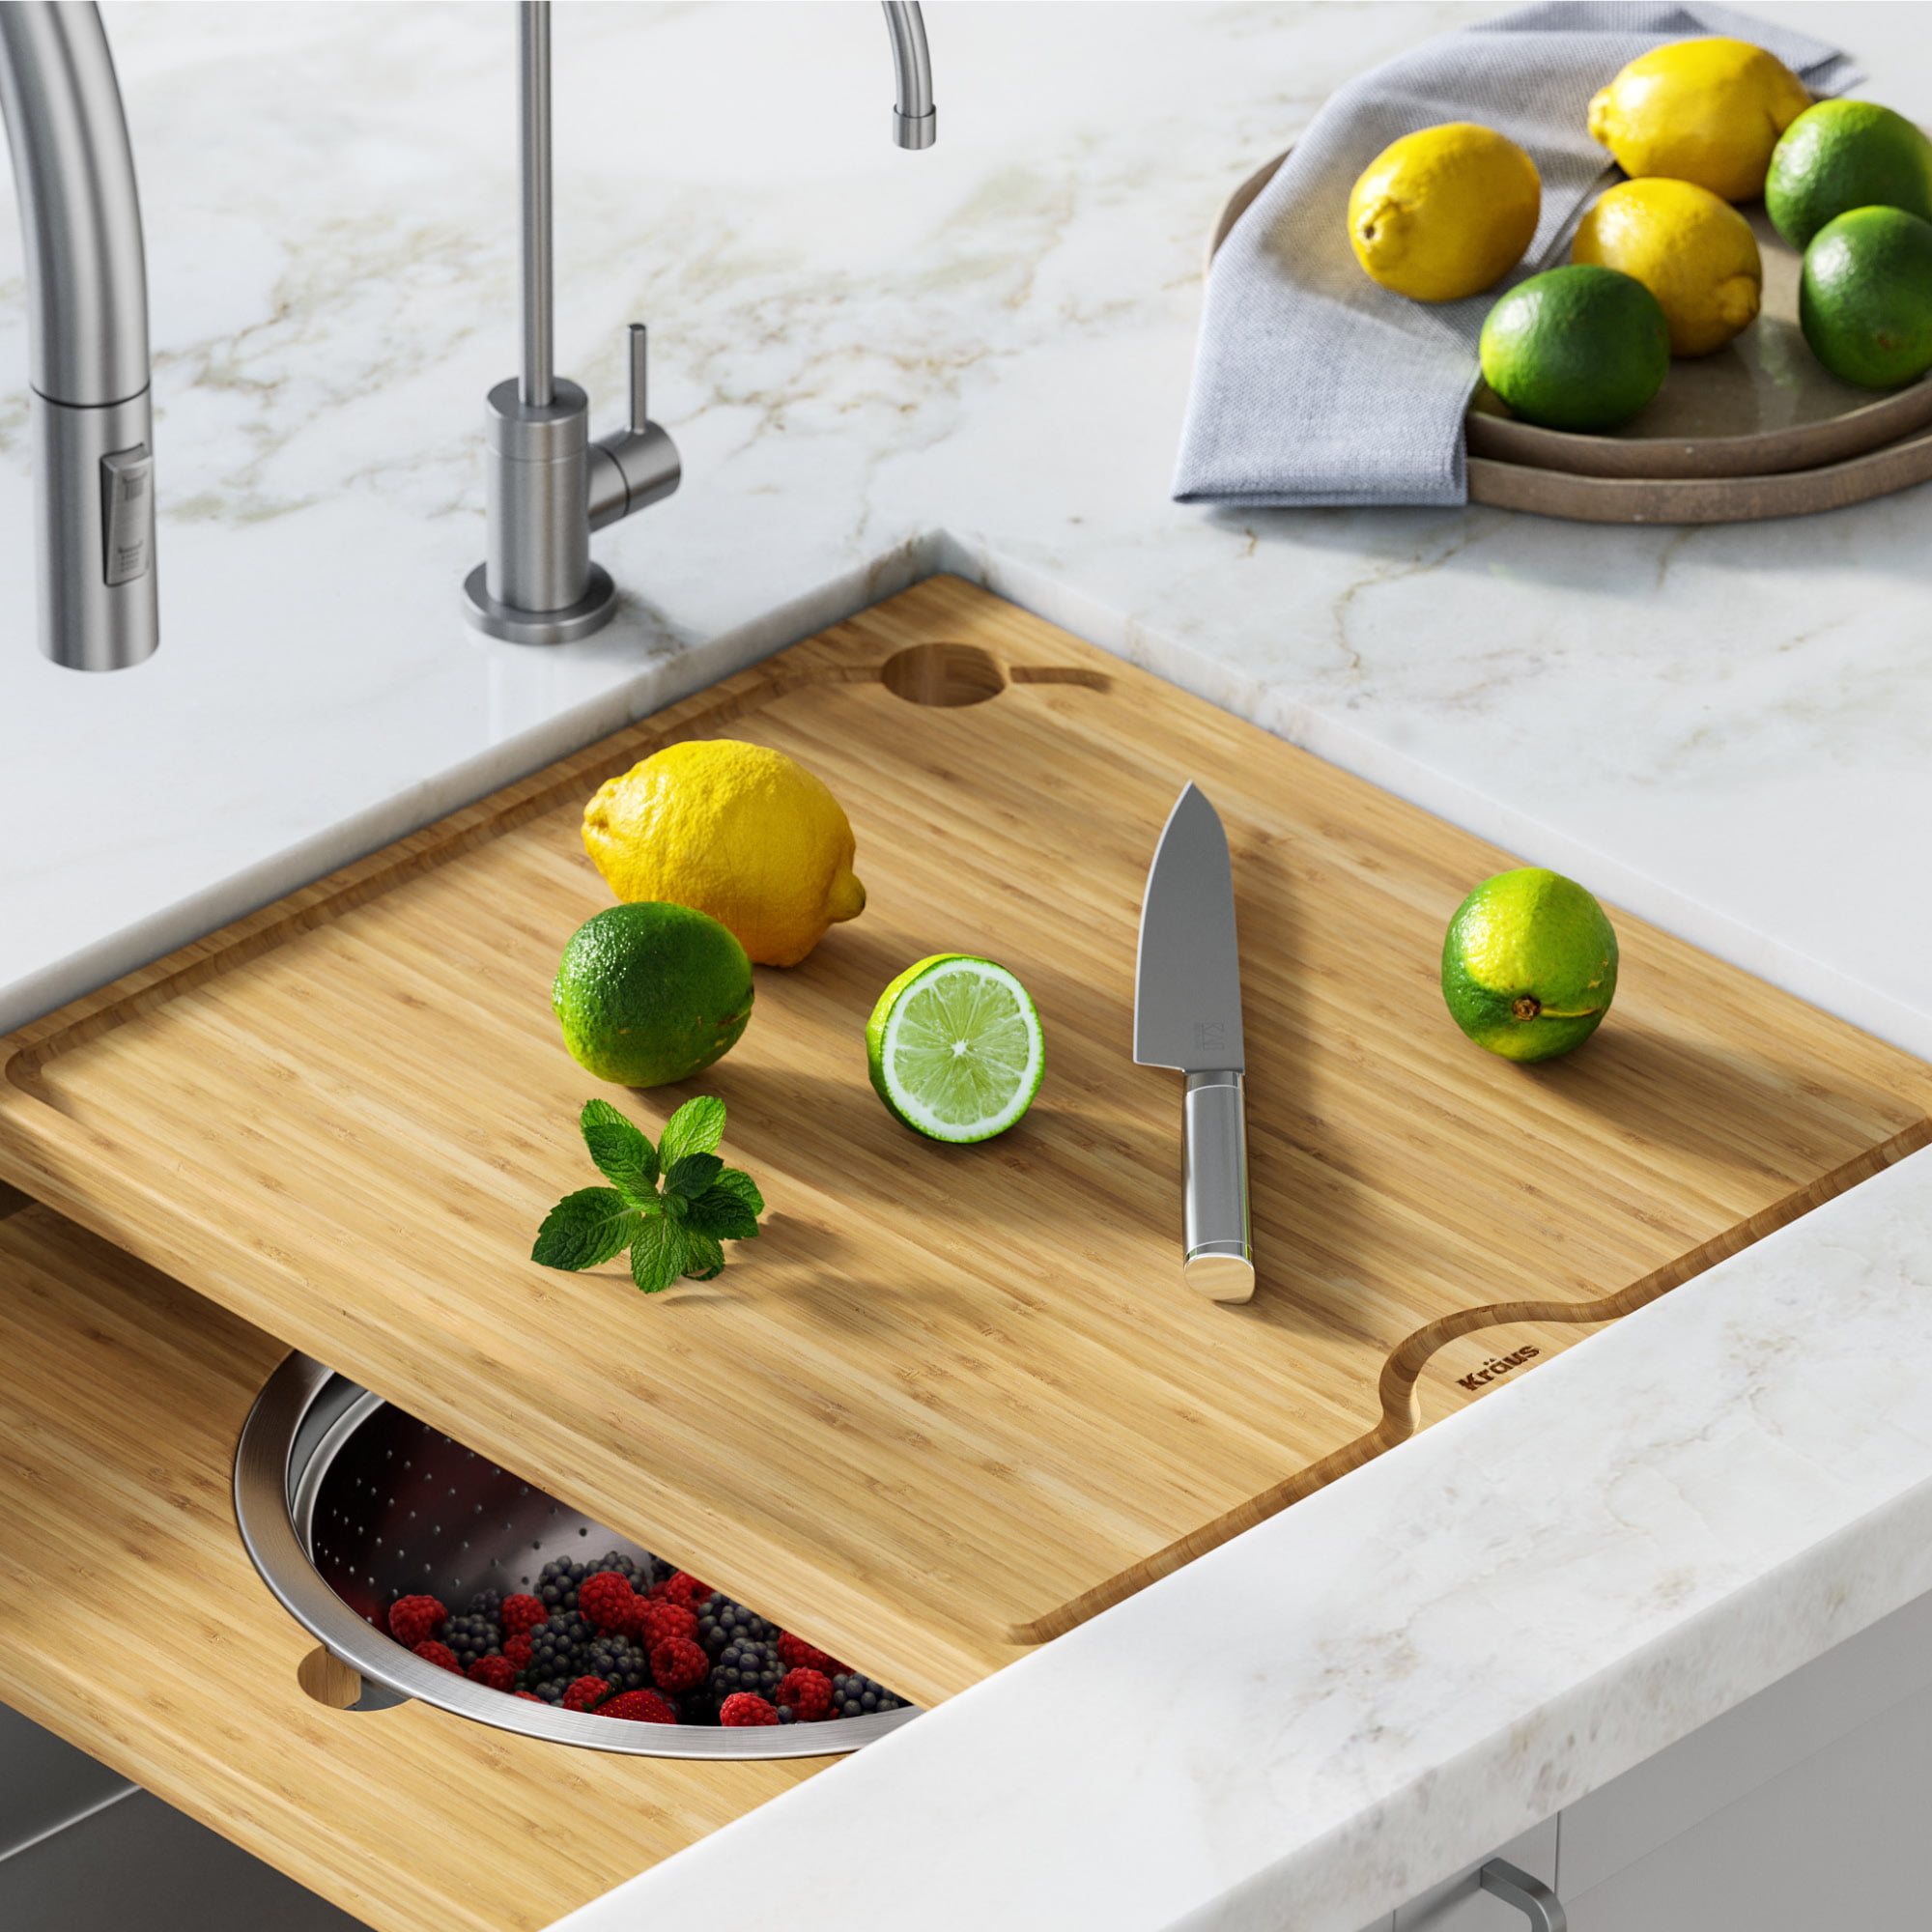 KRAUS Solid Bamboo Cutting Board for Kitchen Sink - Bed Bath & Beyond -  31264545